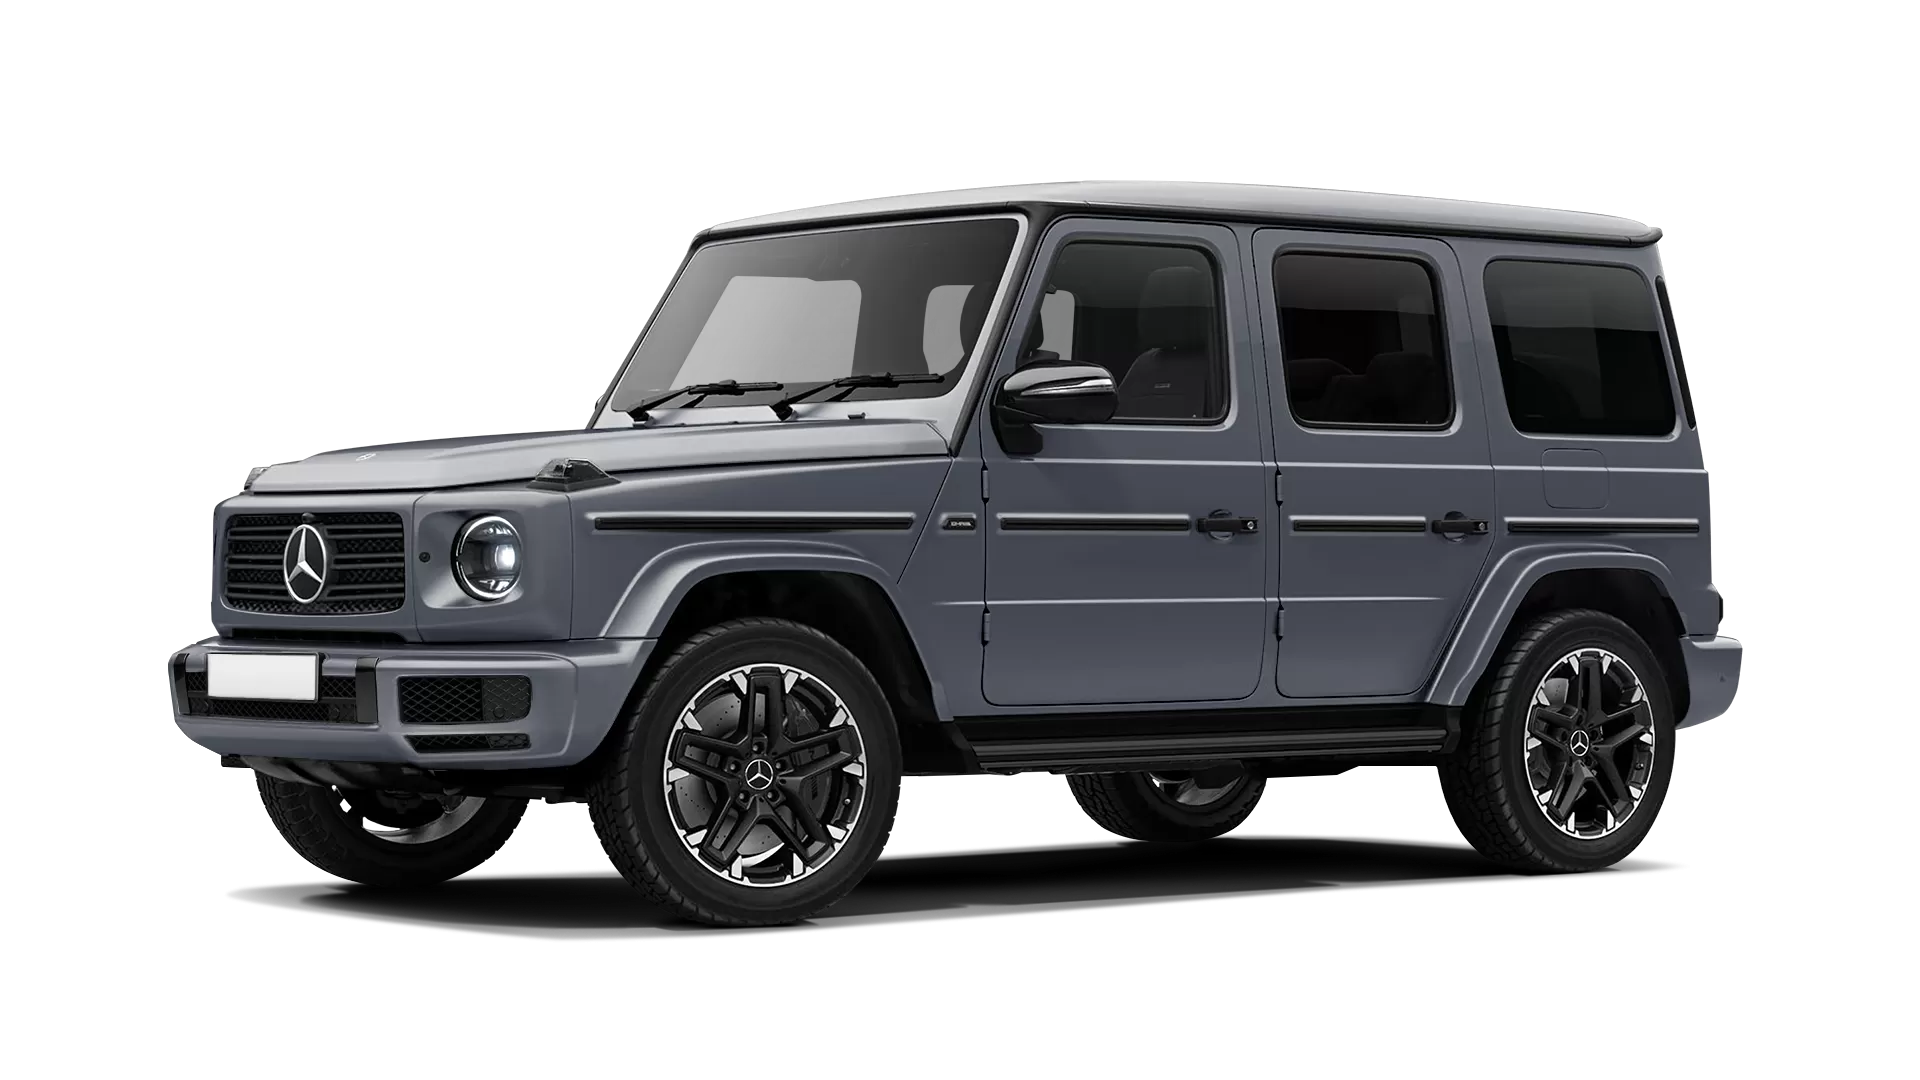 Mercedes G class W463 stock front view in Platinum Magno color